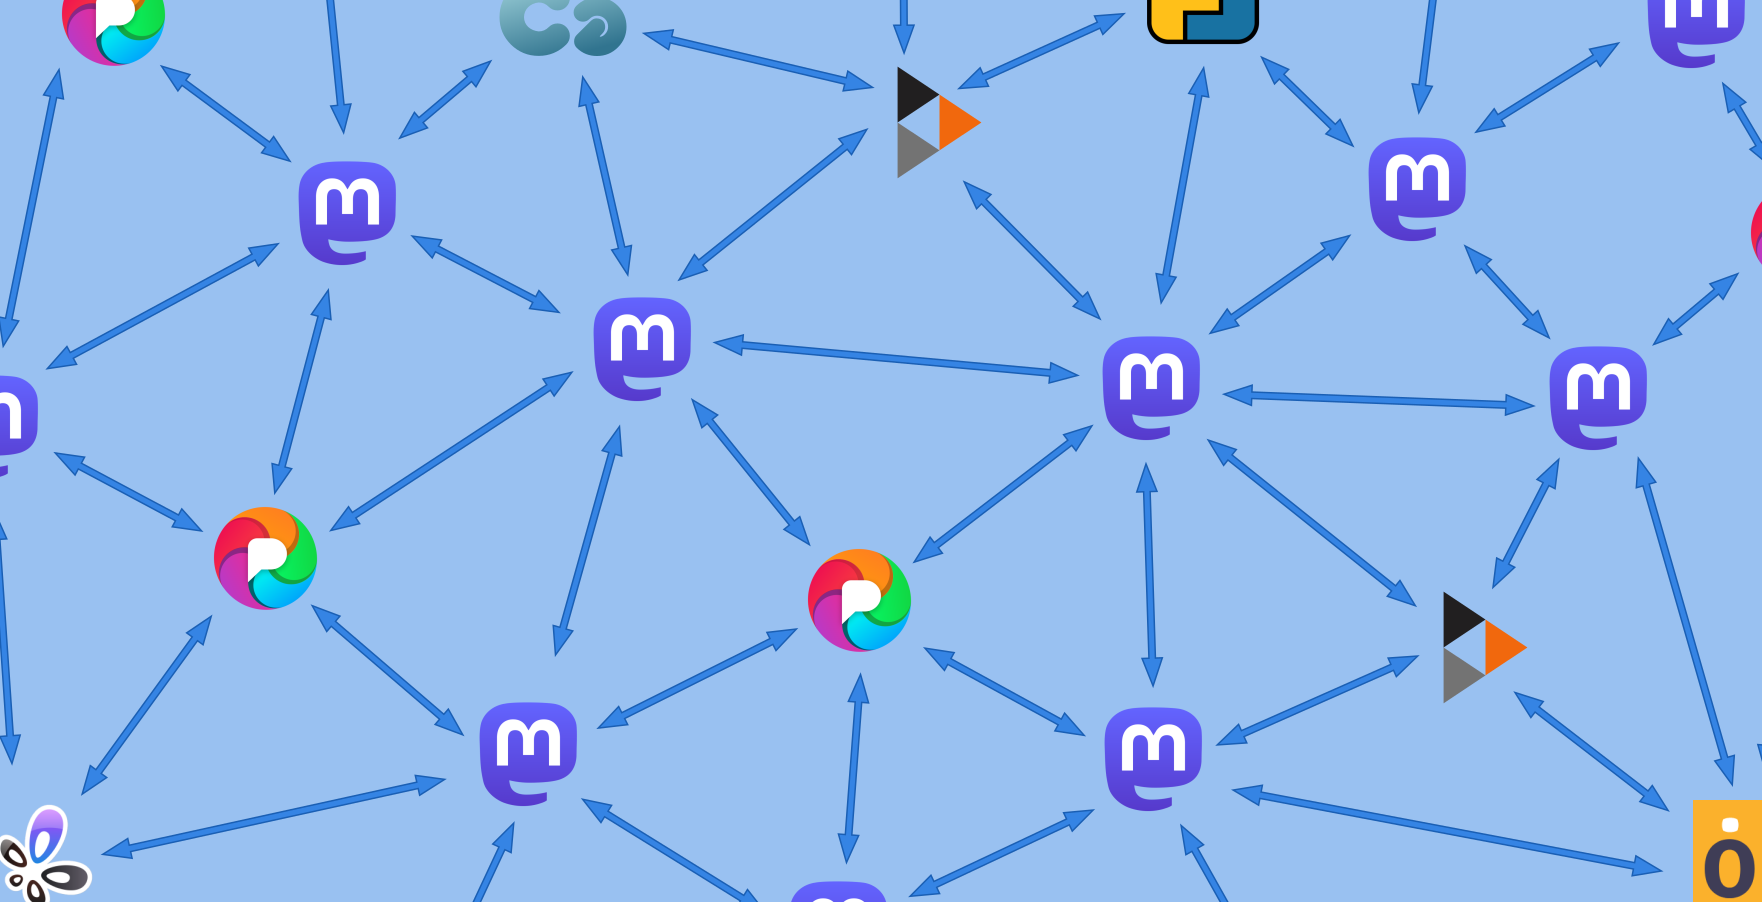 Simplified diagram of the Fediverse, showing symbols of various kinds of server with arrows between them to indicate the connections between servers. There are many Mastodon servers, PixelFed servers, PeerTube servers etc.